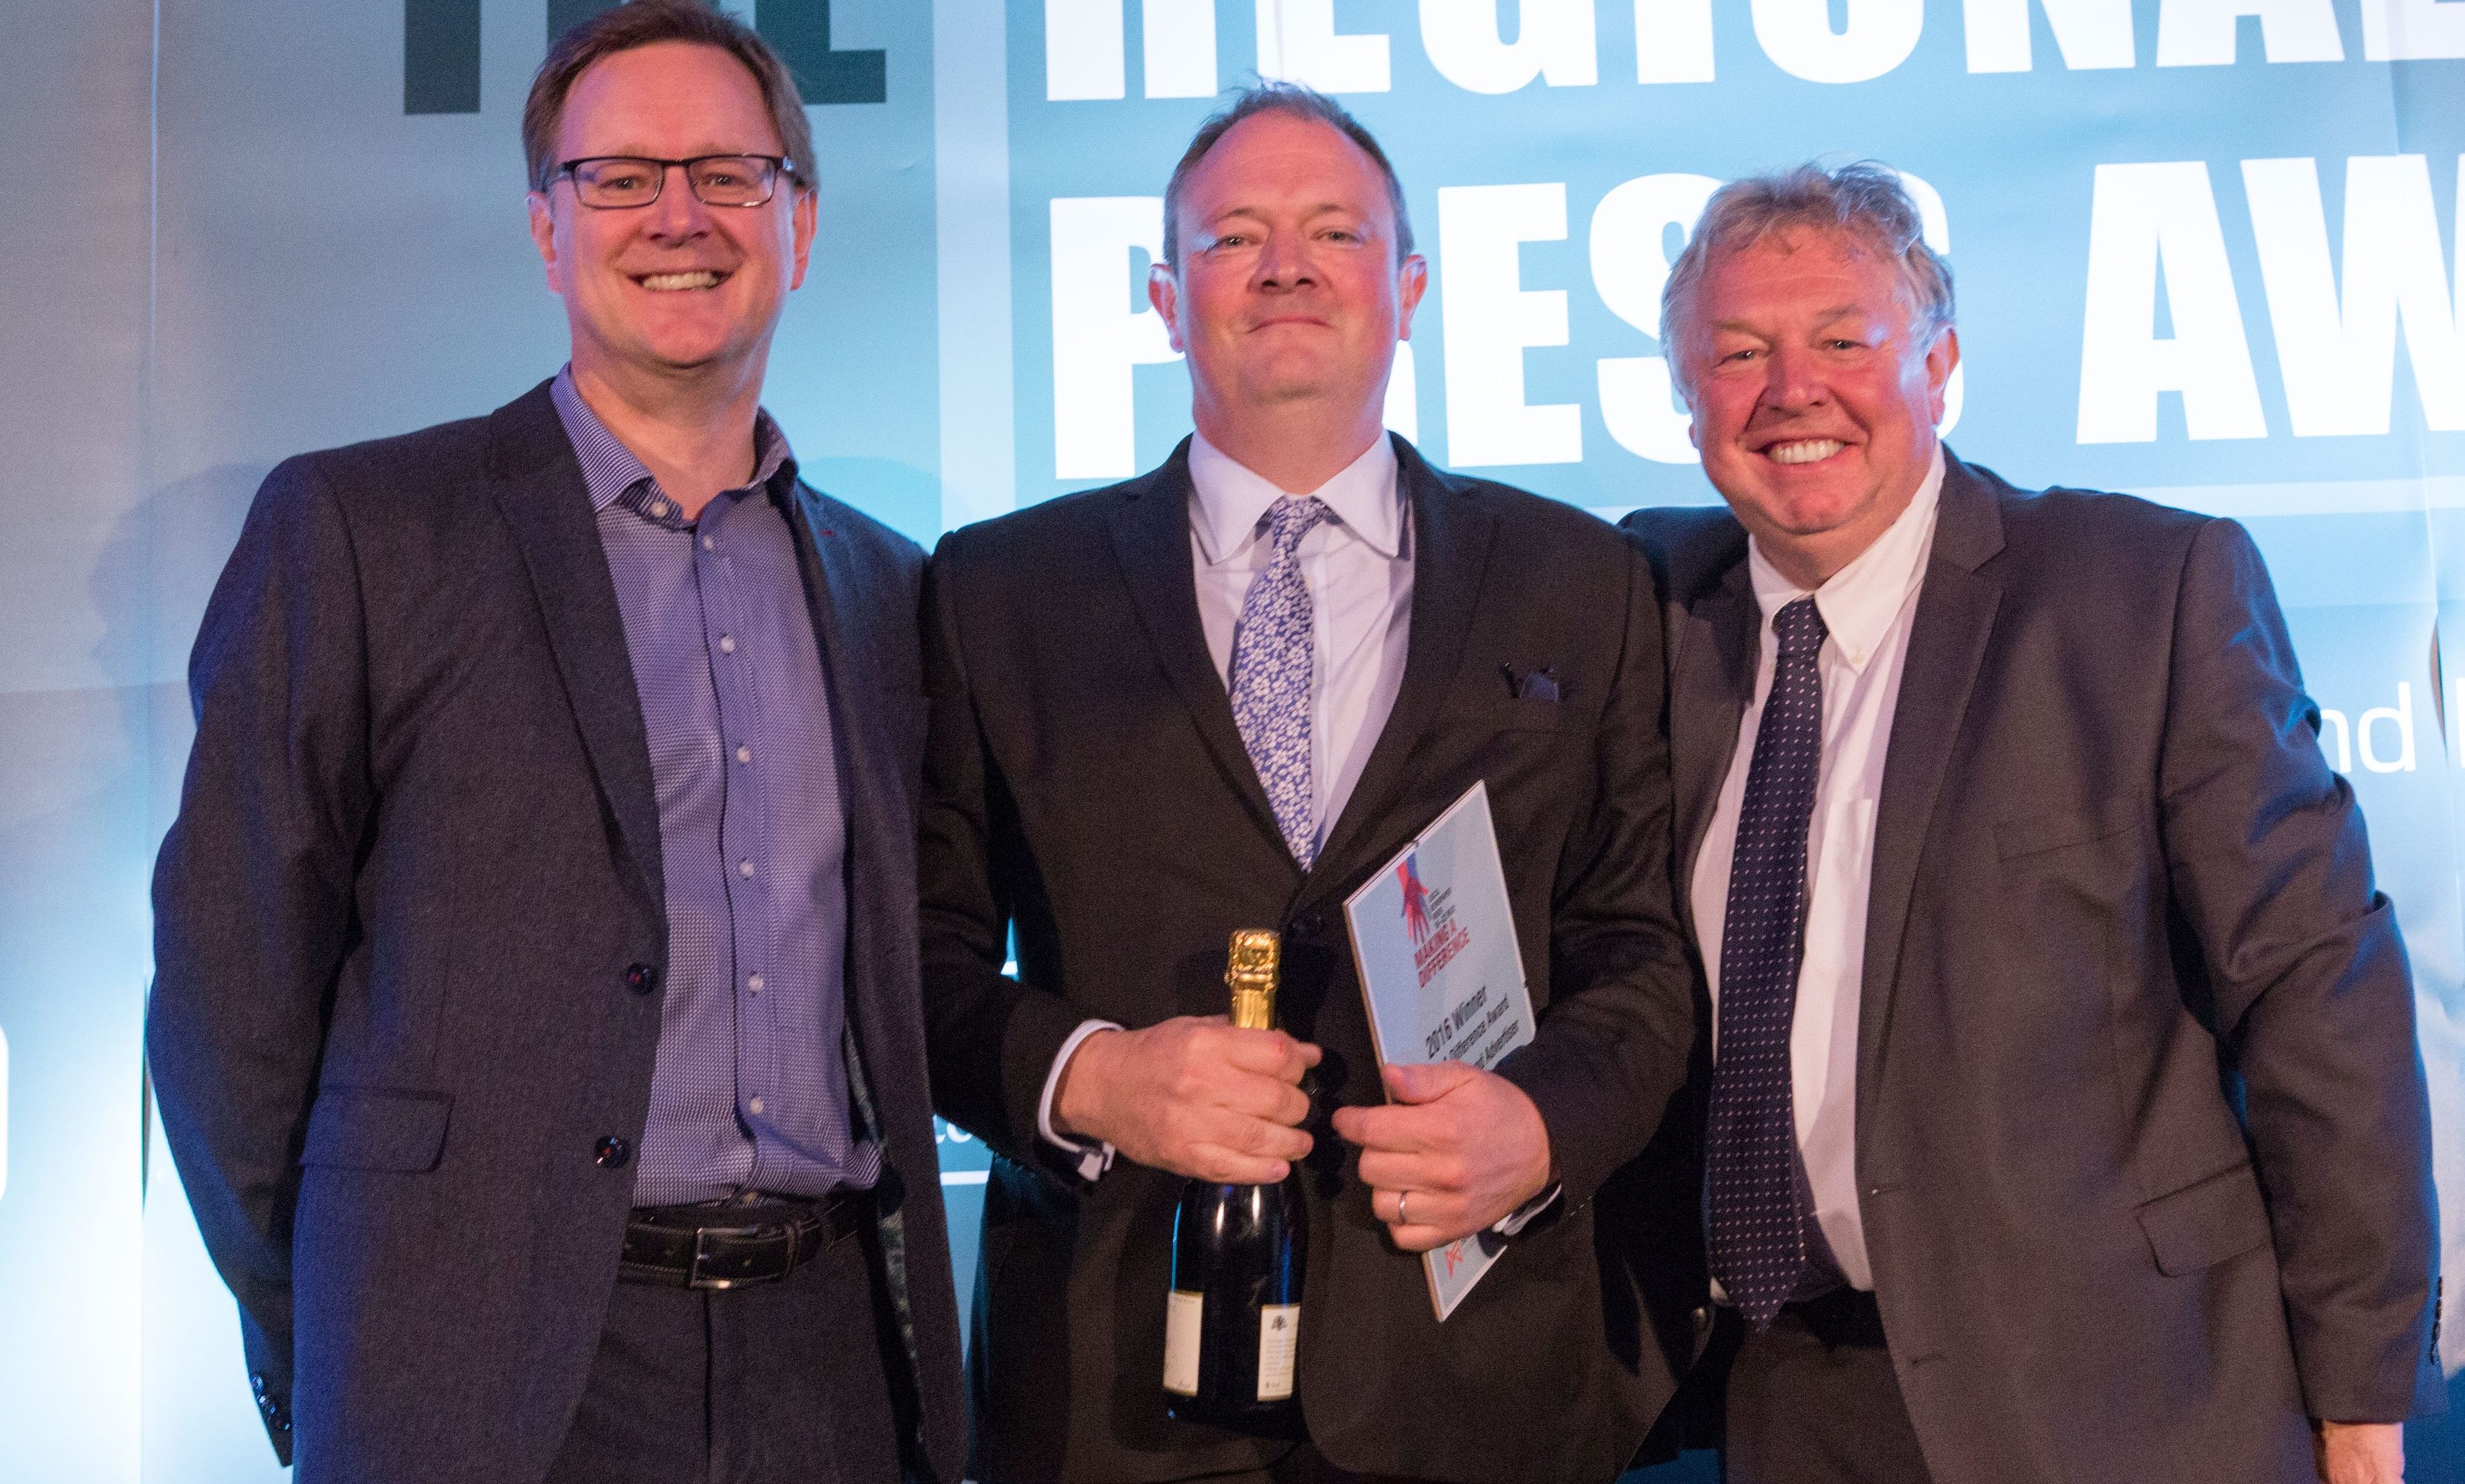 Courier editor Richard Neville accepting the making A Difference Award from Ashley Highfield, left, and host Nick Ferrari, right.